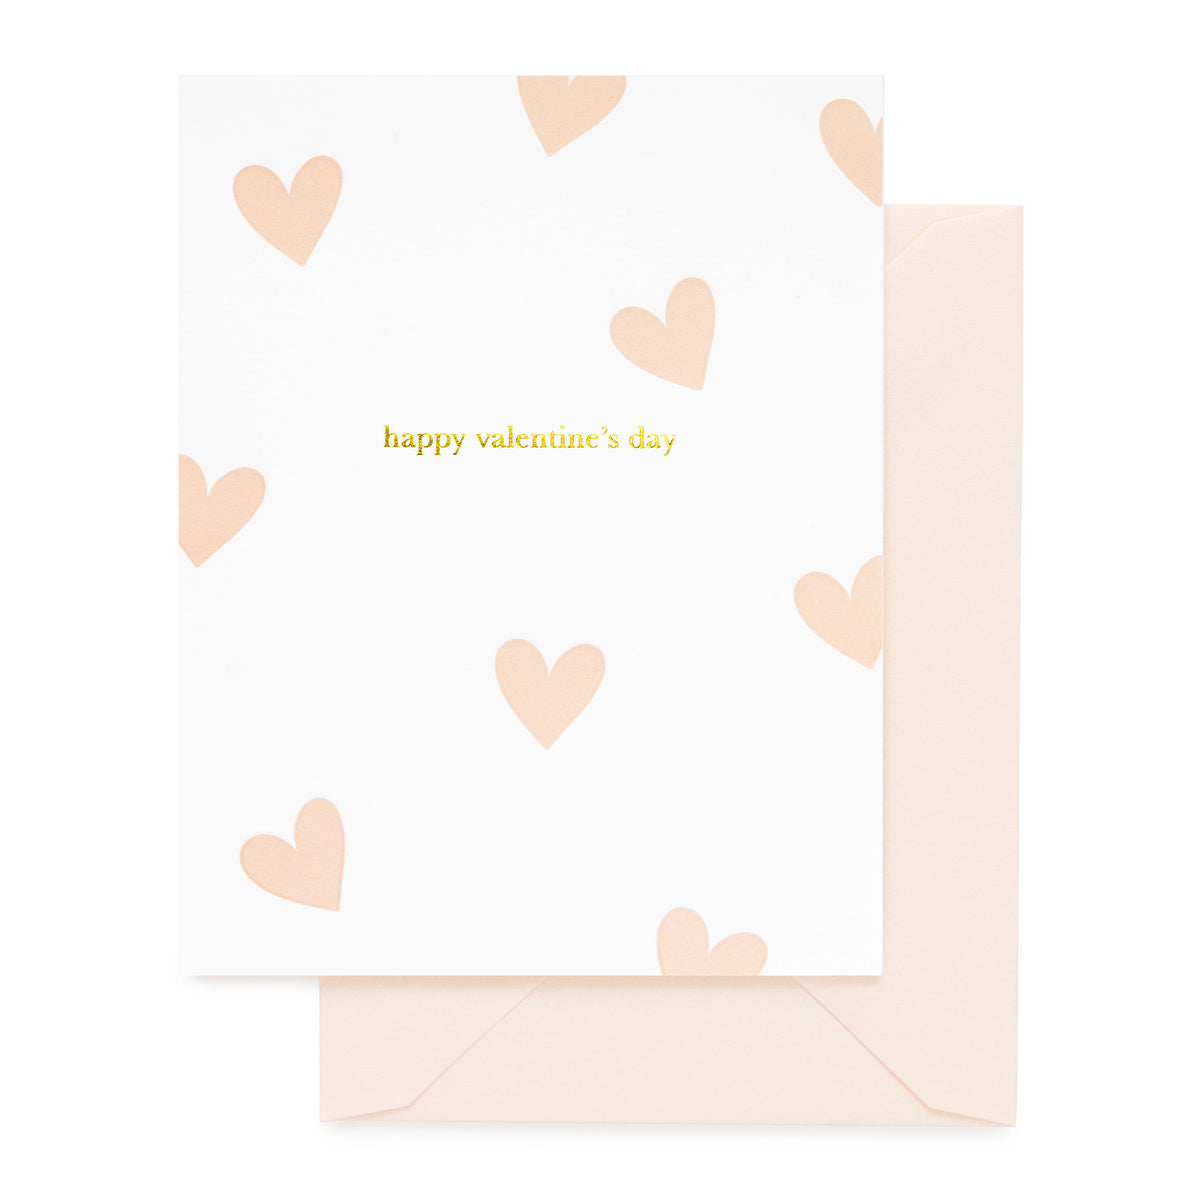 white card with gold text and pale pink hearts, pale pink envelope